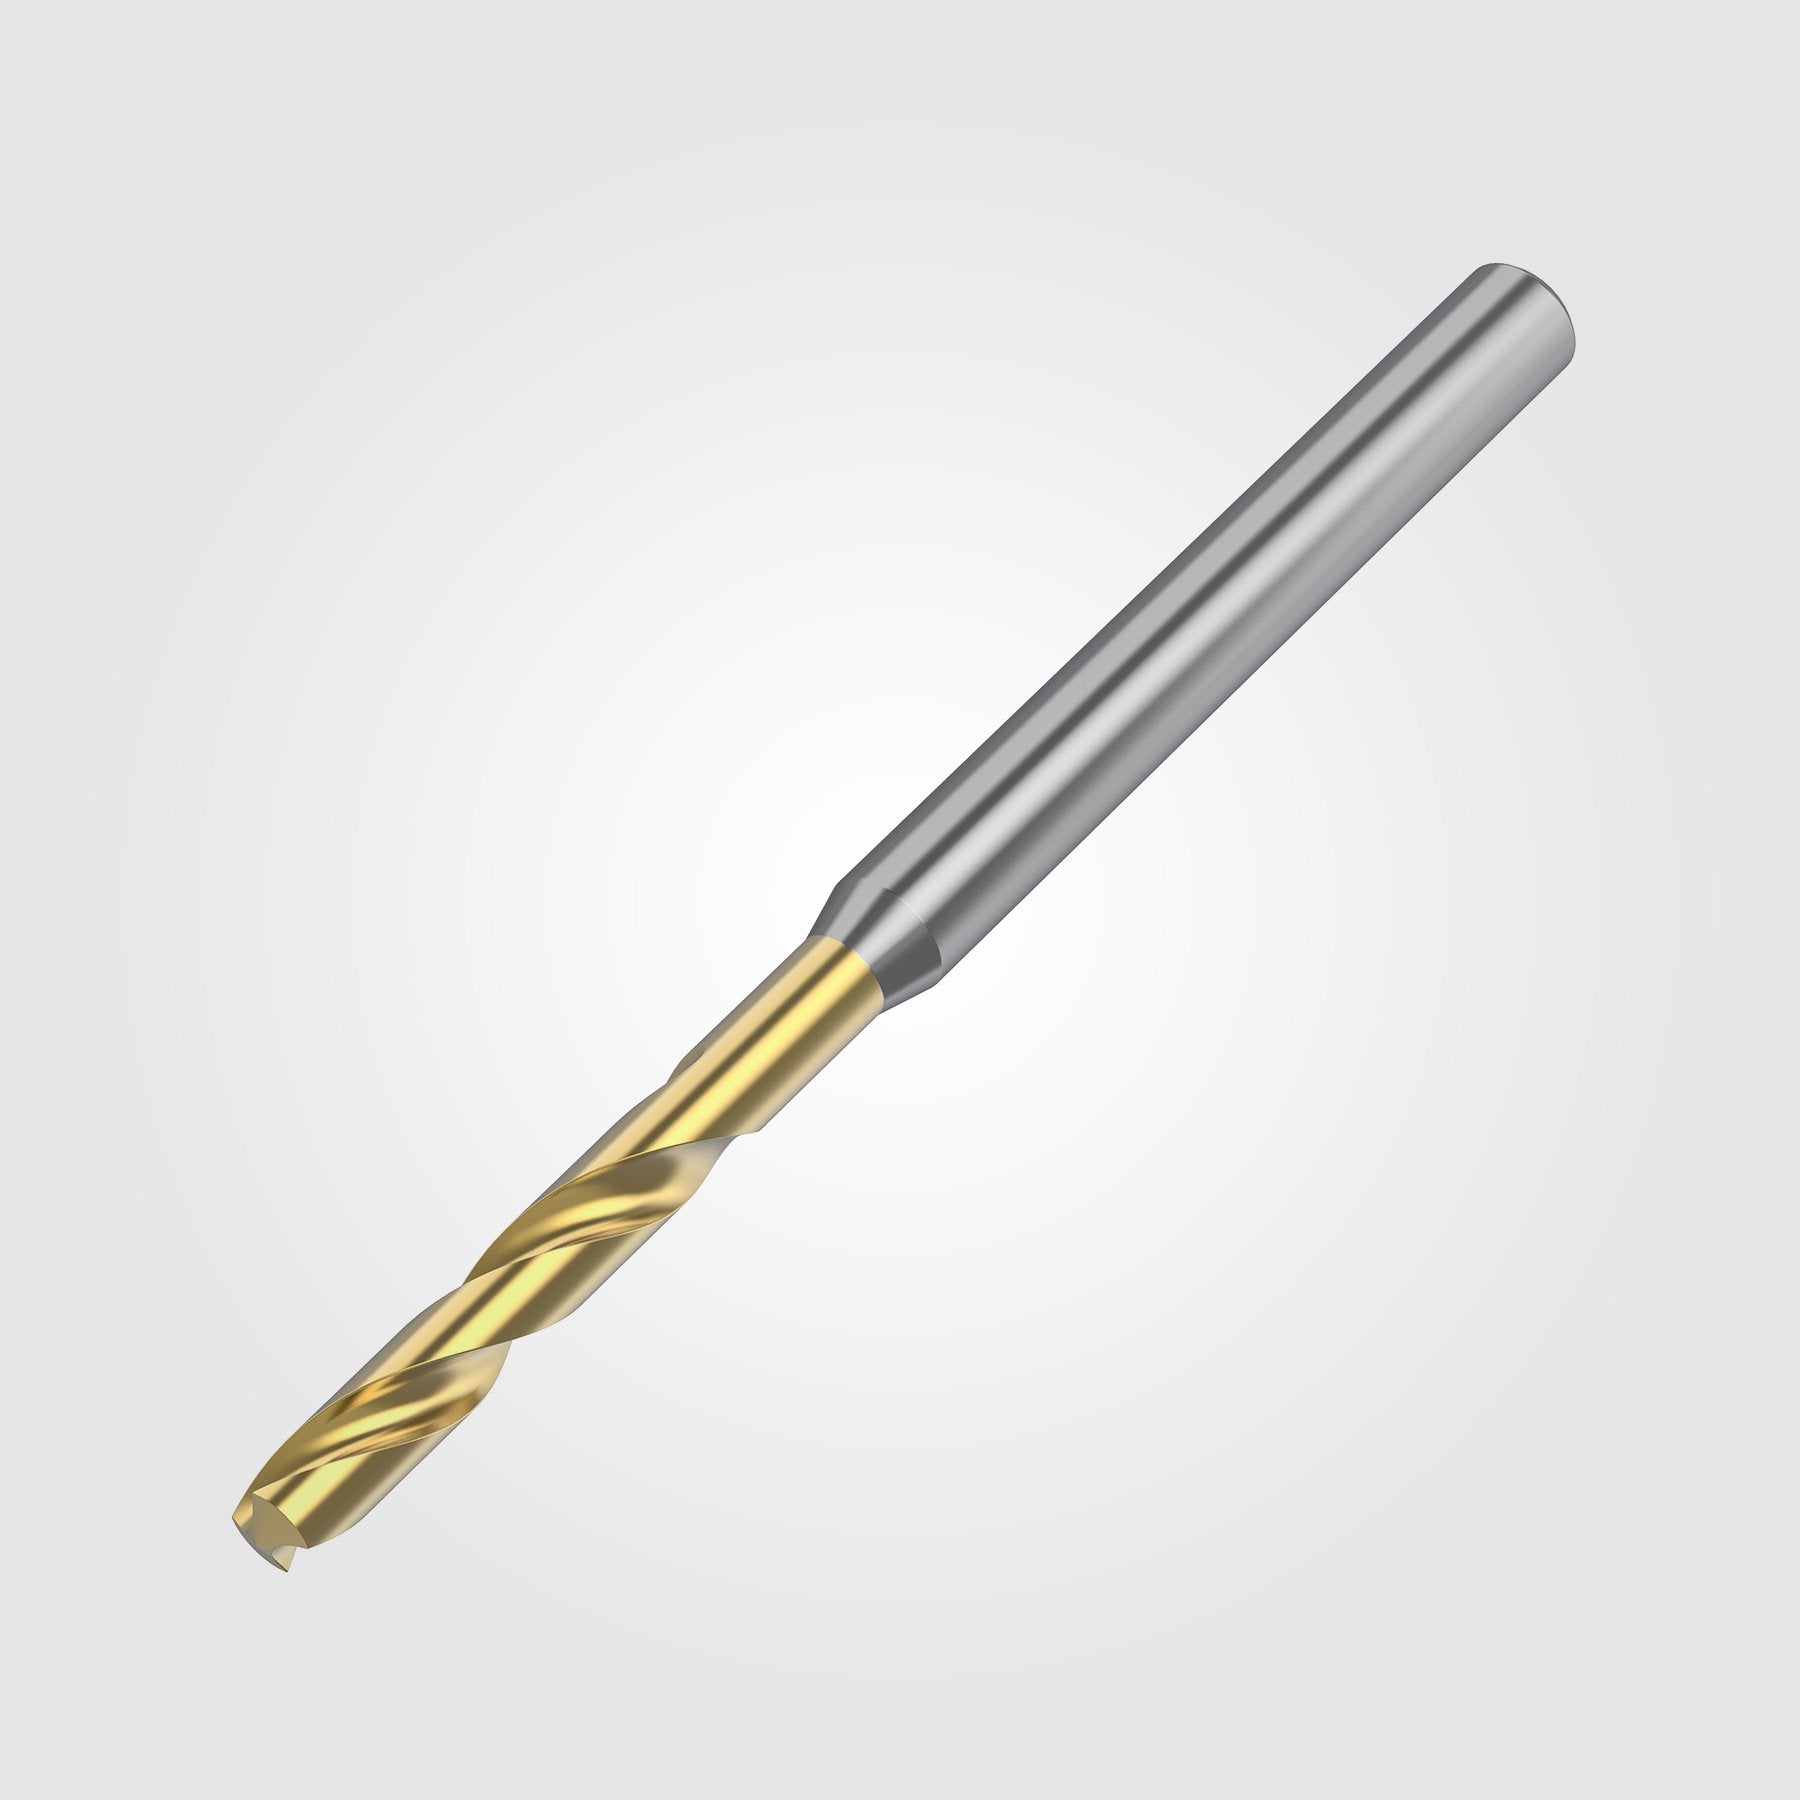 GOdrill (THROUGH COOLANT) | 18.654mm / .7344" / 3xD | SOLID CARBIDE DRILL | 4148583